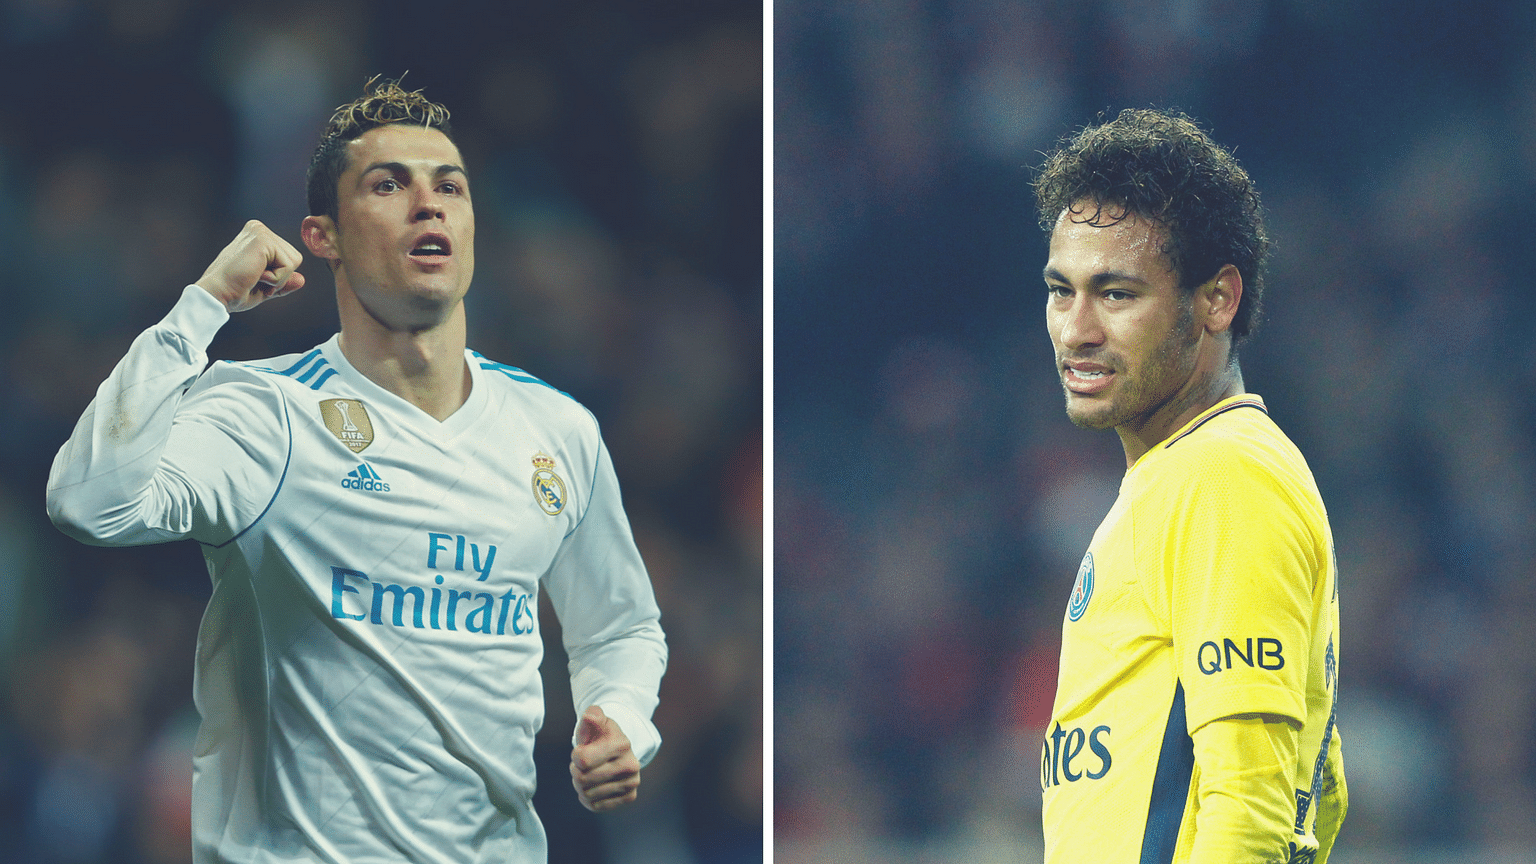 File pictures of Cristiano Ronaldo (left) and Neymar